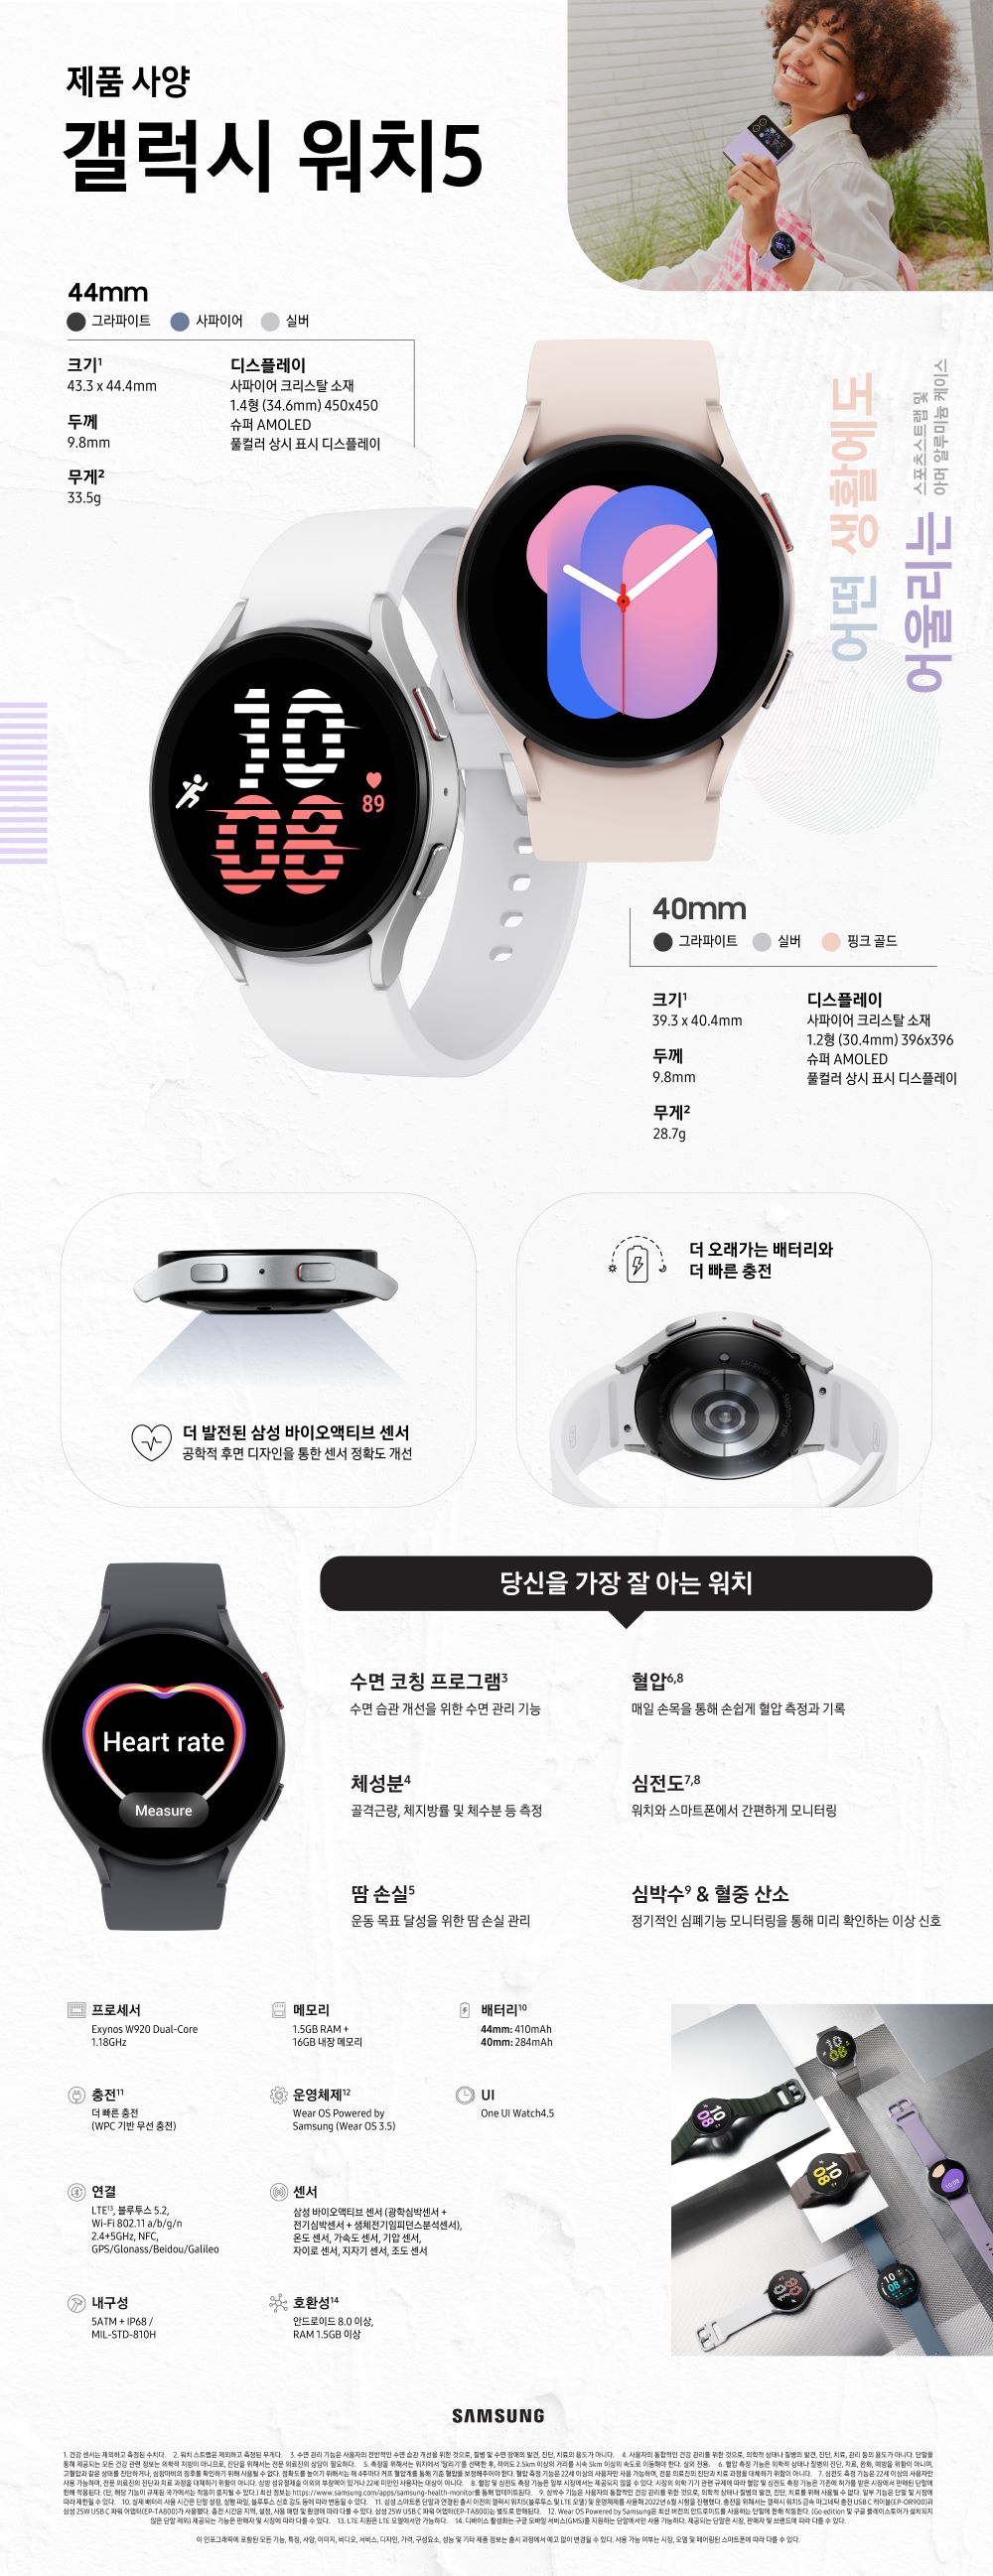 220810_Galaxy_Watch5_Product_Specifications_KOR.jpg